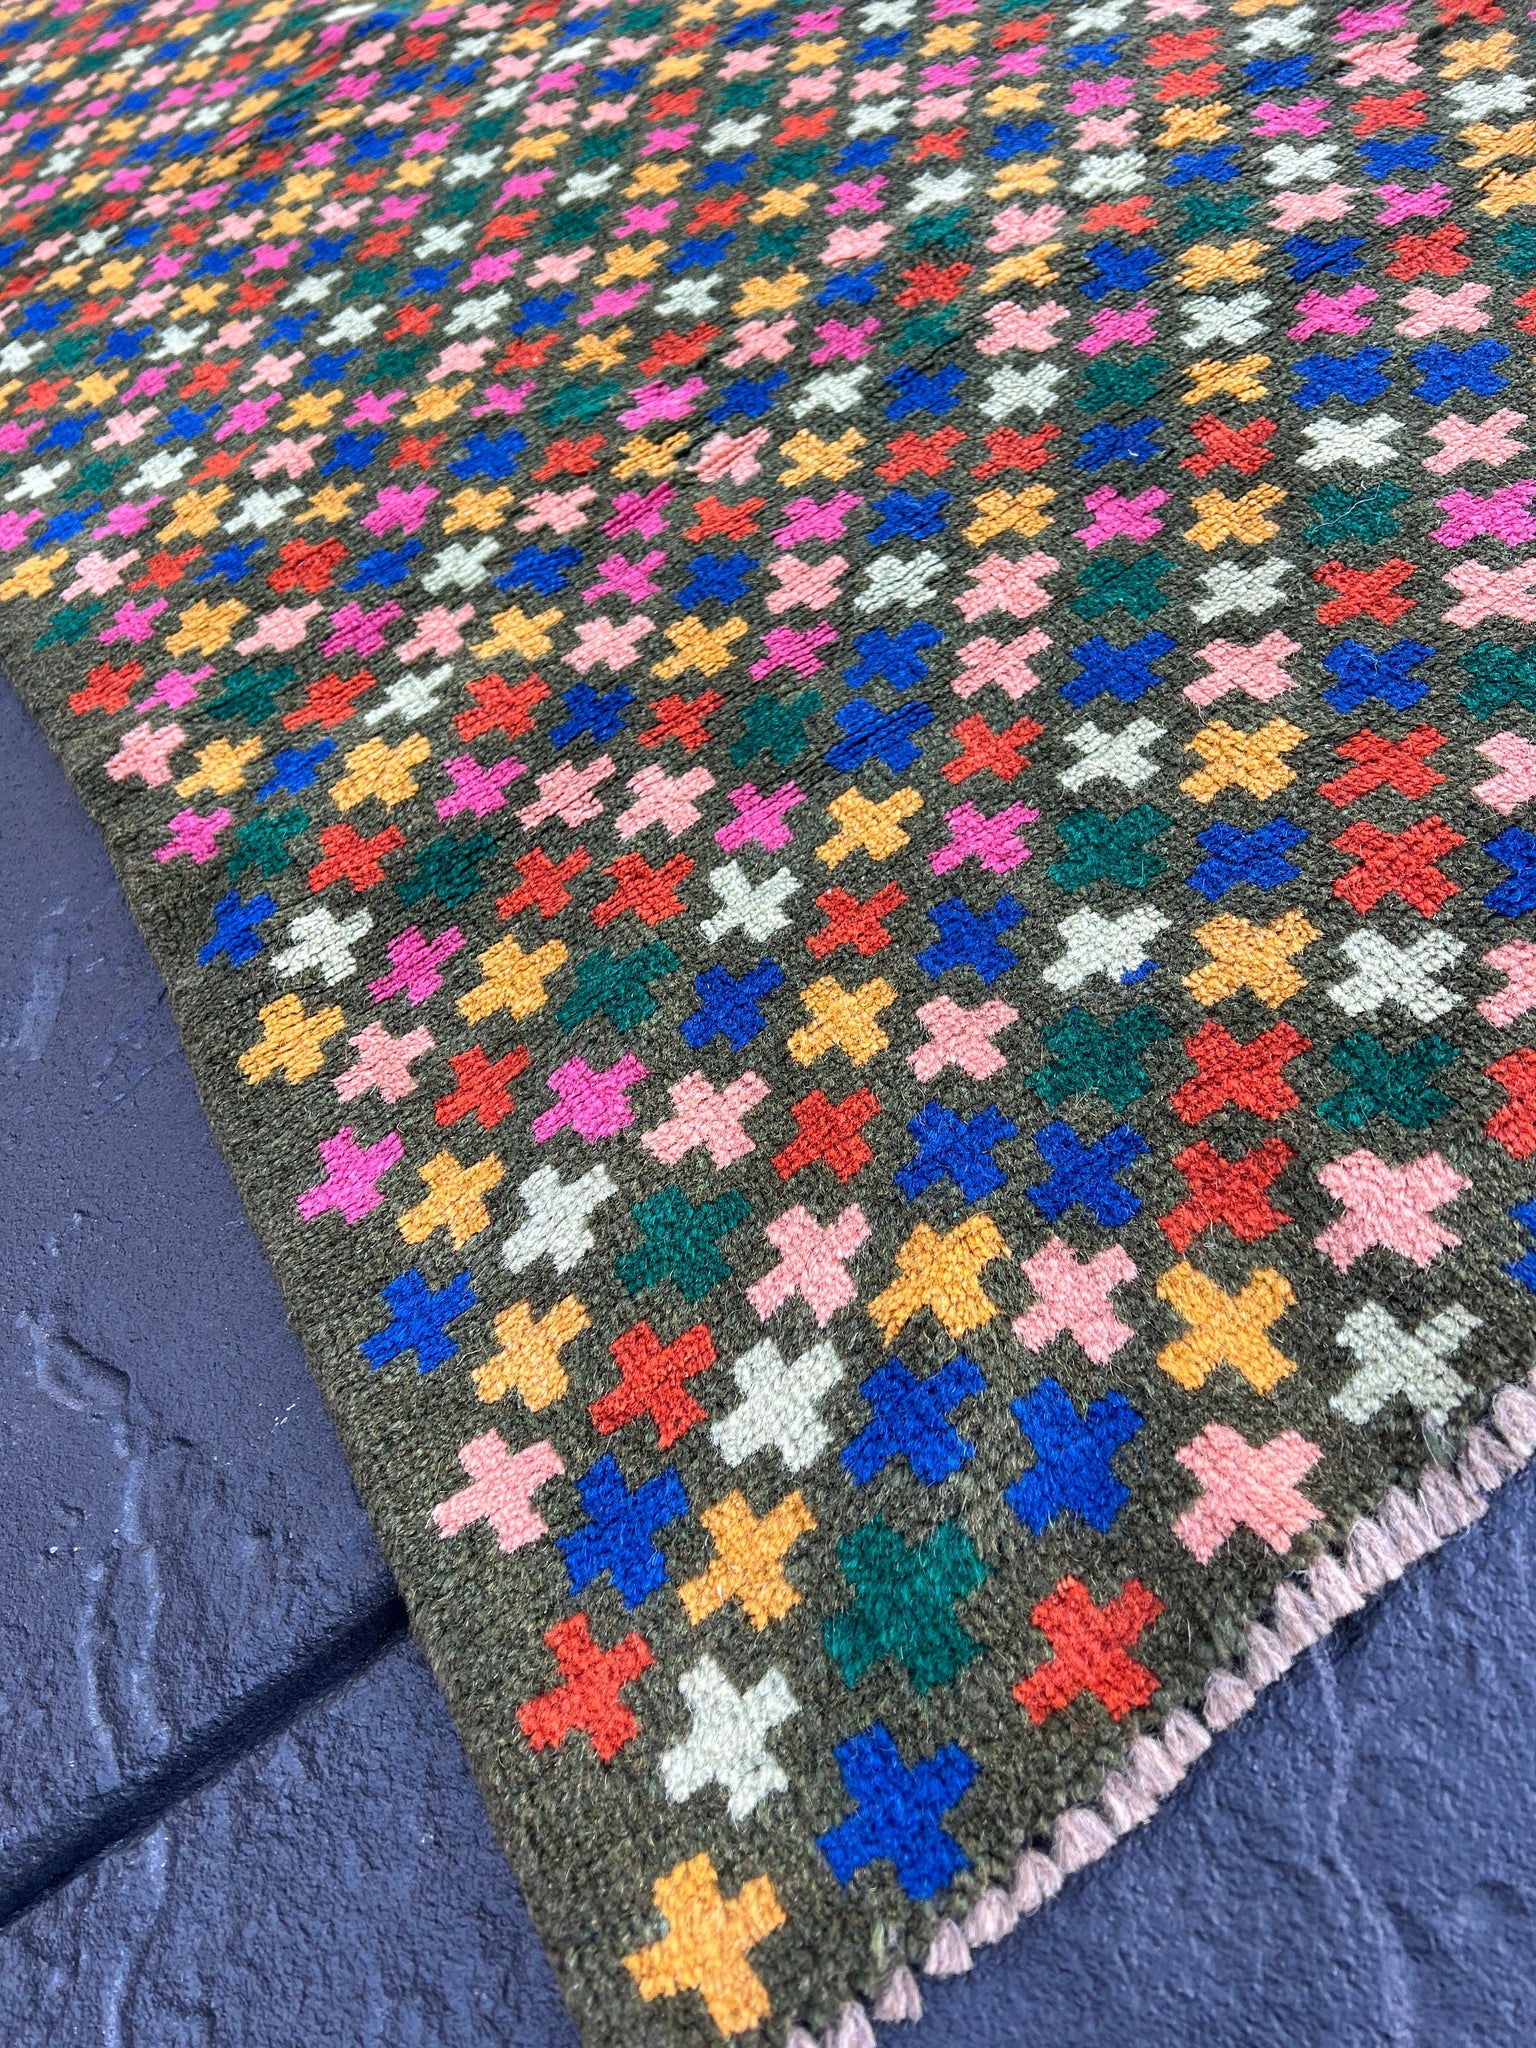 3x10 (90x305) Handmade Vintage Baluch Afghan Runner Rug | Forest Green Rose Pink Chocolate Brown Blush Pink Turquoise Blue Teal Hand Knotted